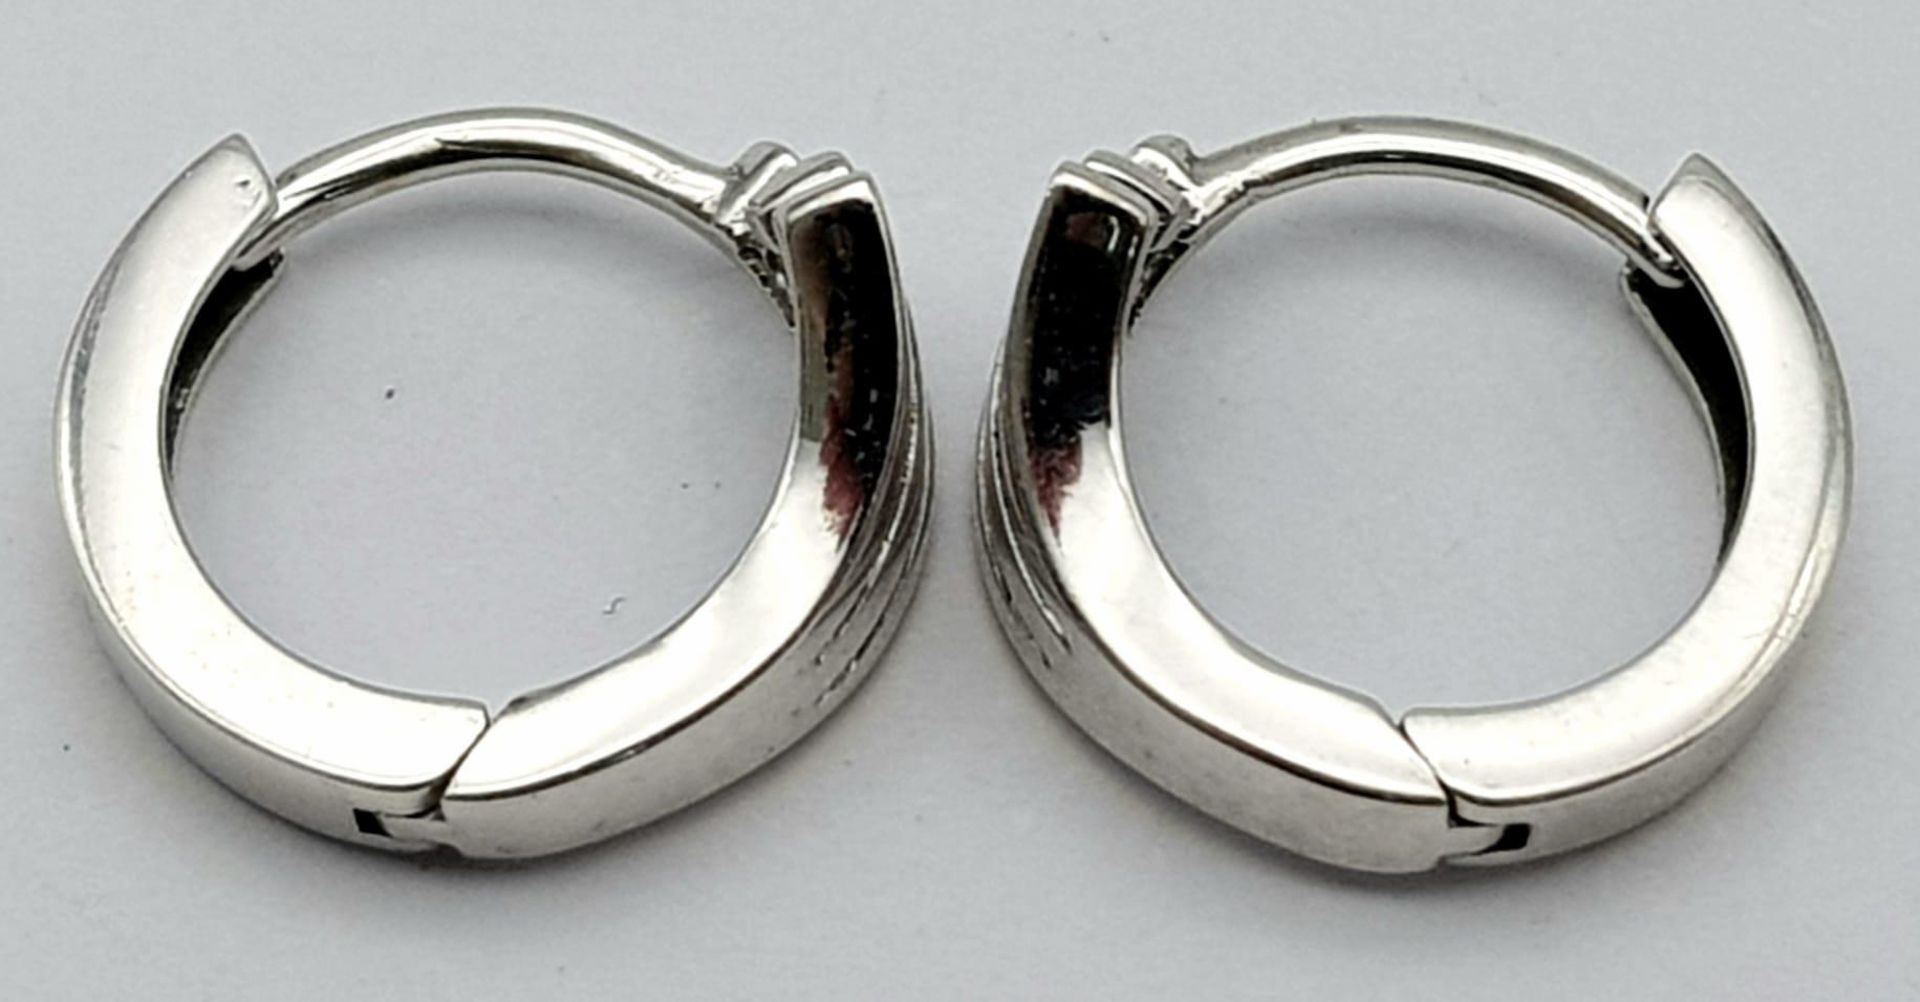 Pair of 18K White Gold CZ Mini Hoops earrings, 3.1g total weight - Image 3 of 10